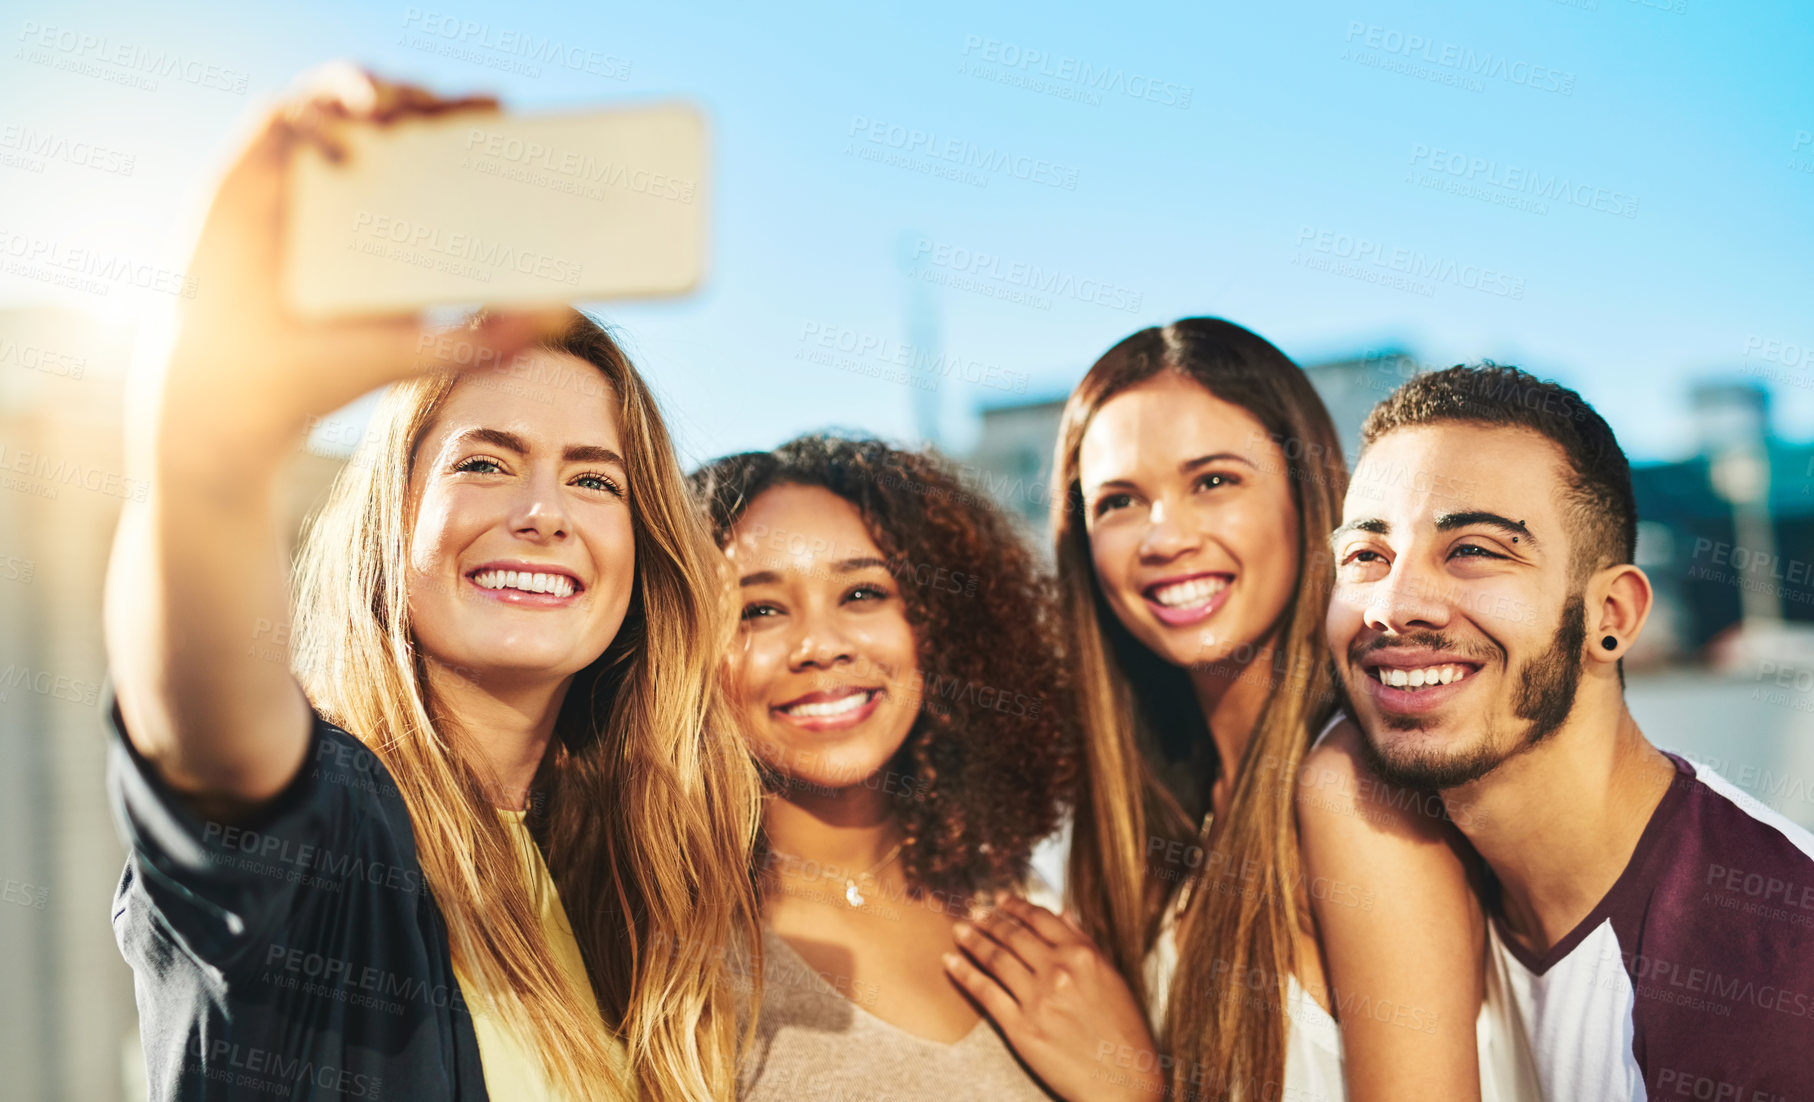 Buy stock photo Shot of young friends taking a selfie outside